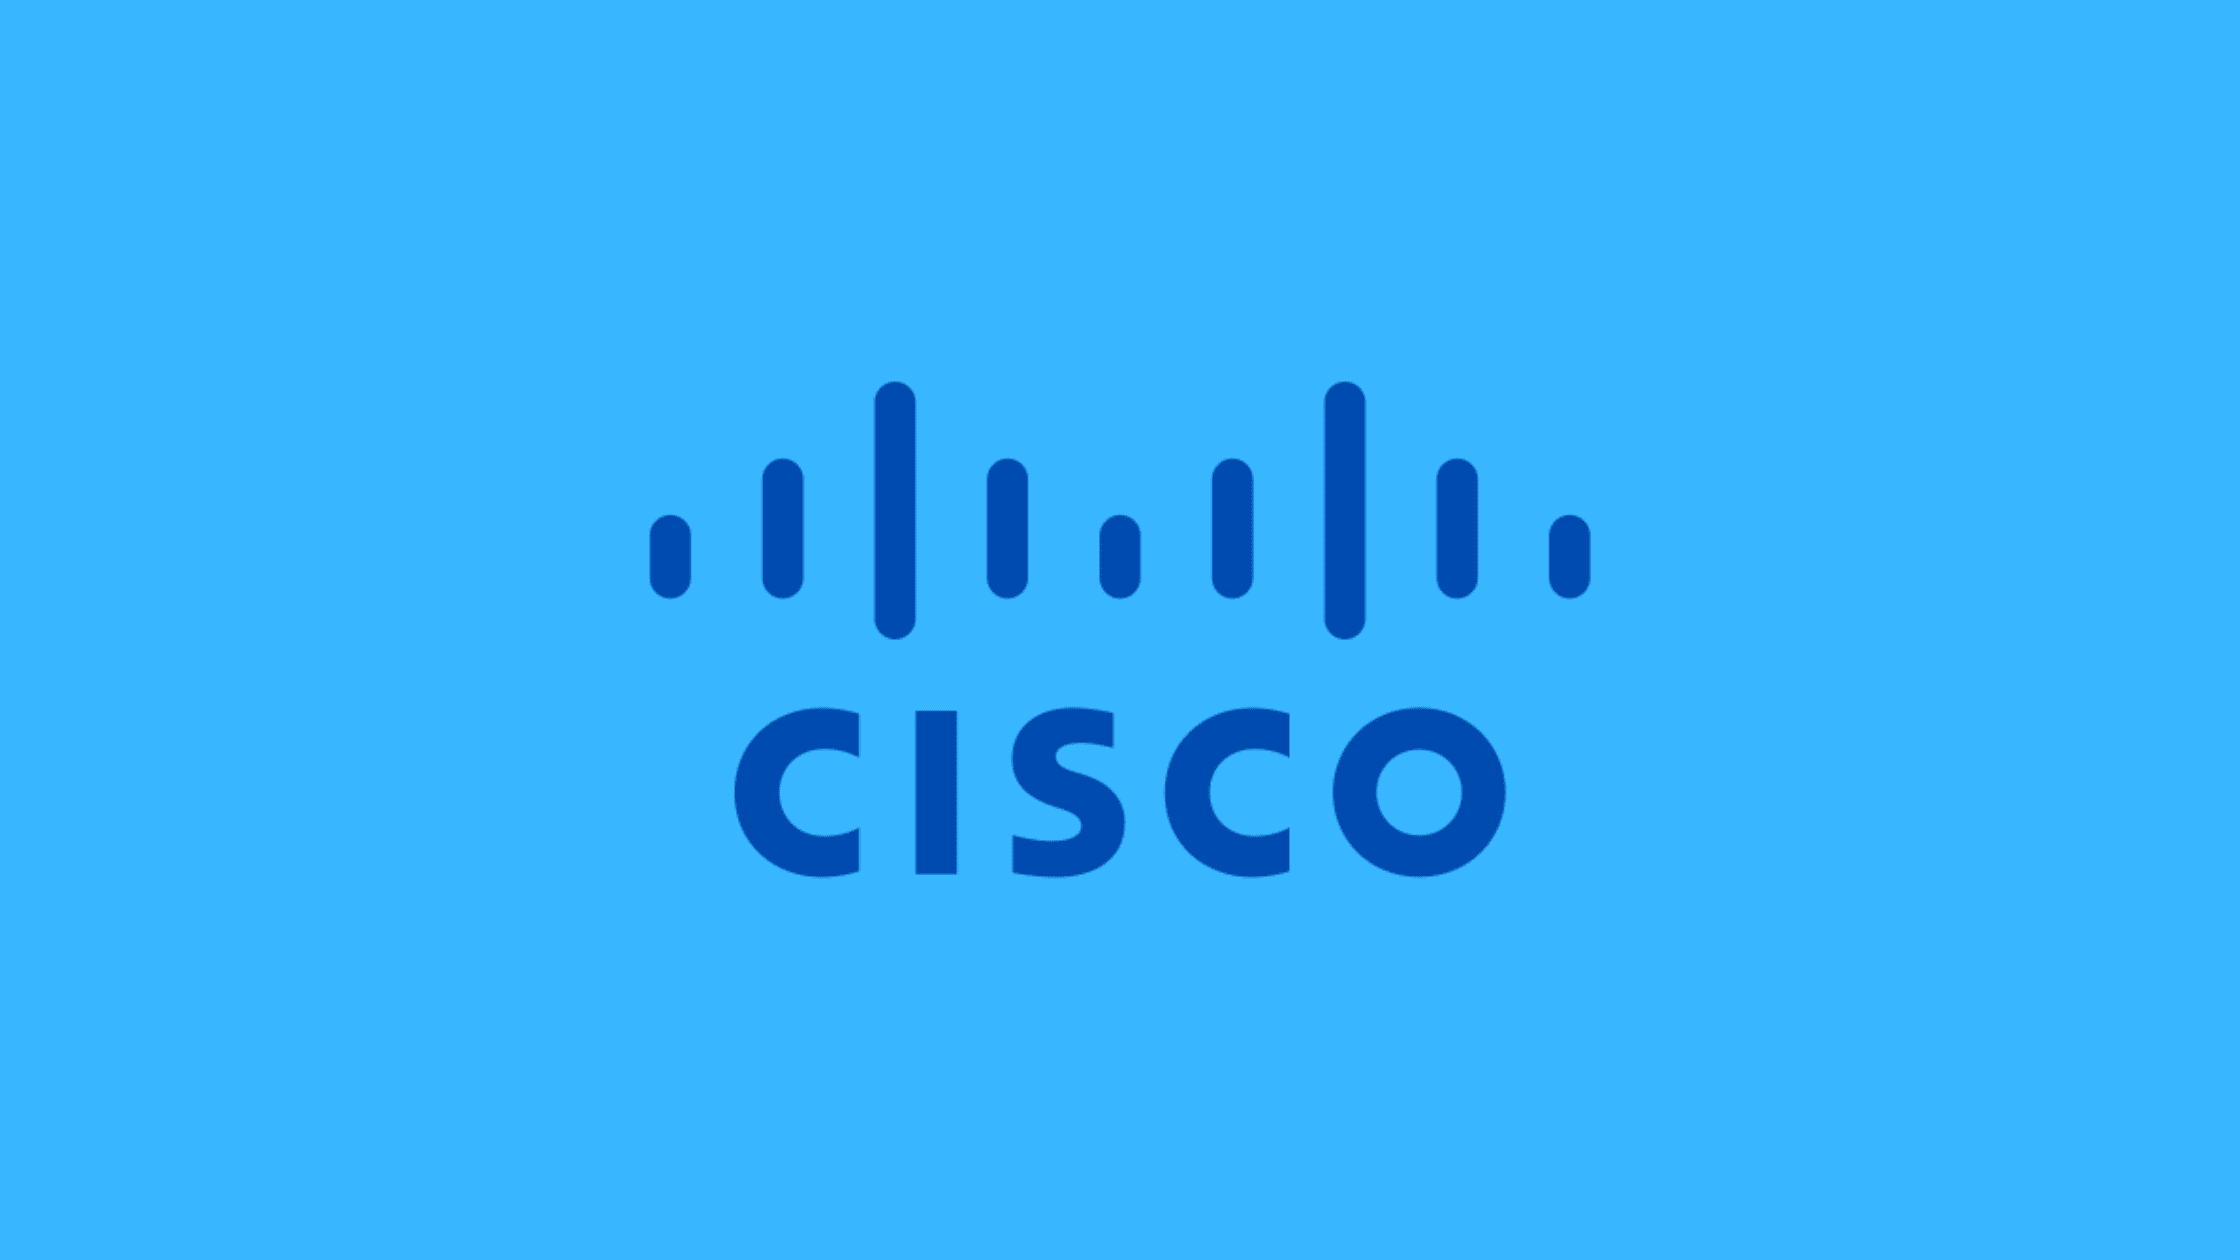 How To Fix Cve 2023 20036 And Cve 2023 20039 Command Injection And File Permissions Vulnerabilities In Cisco Industrial Network Director Ind